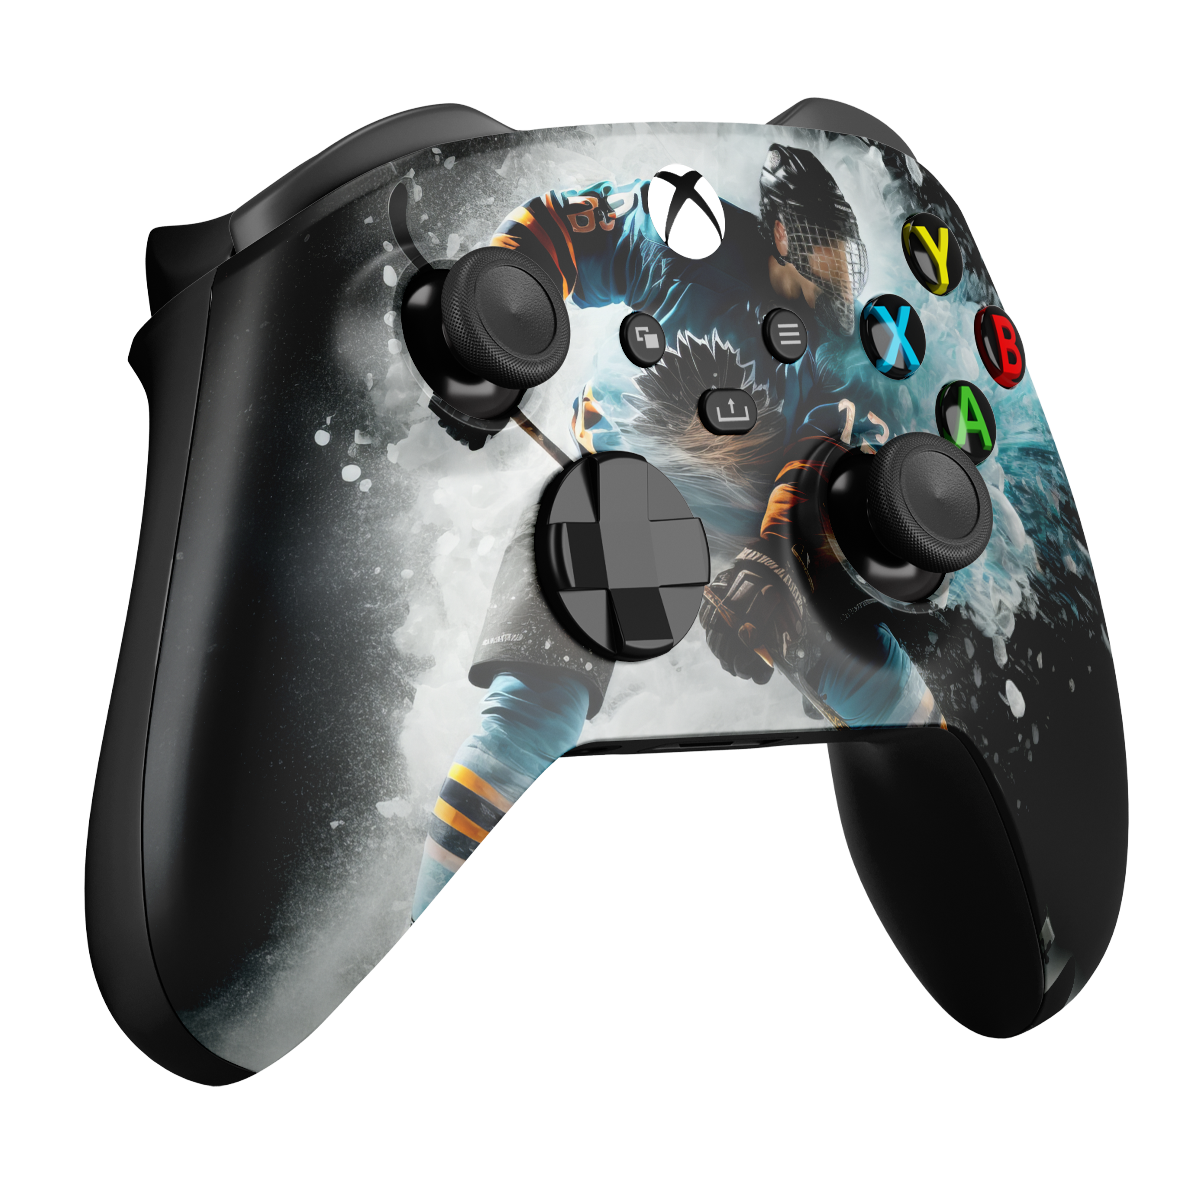 Create your new custom xbox one x controller with New Unique designs